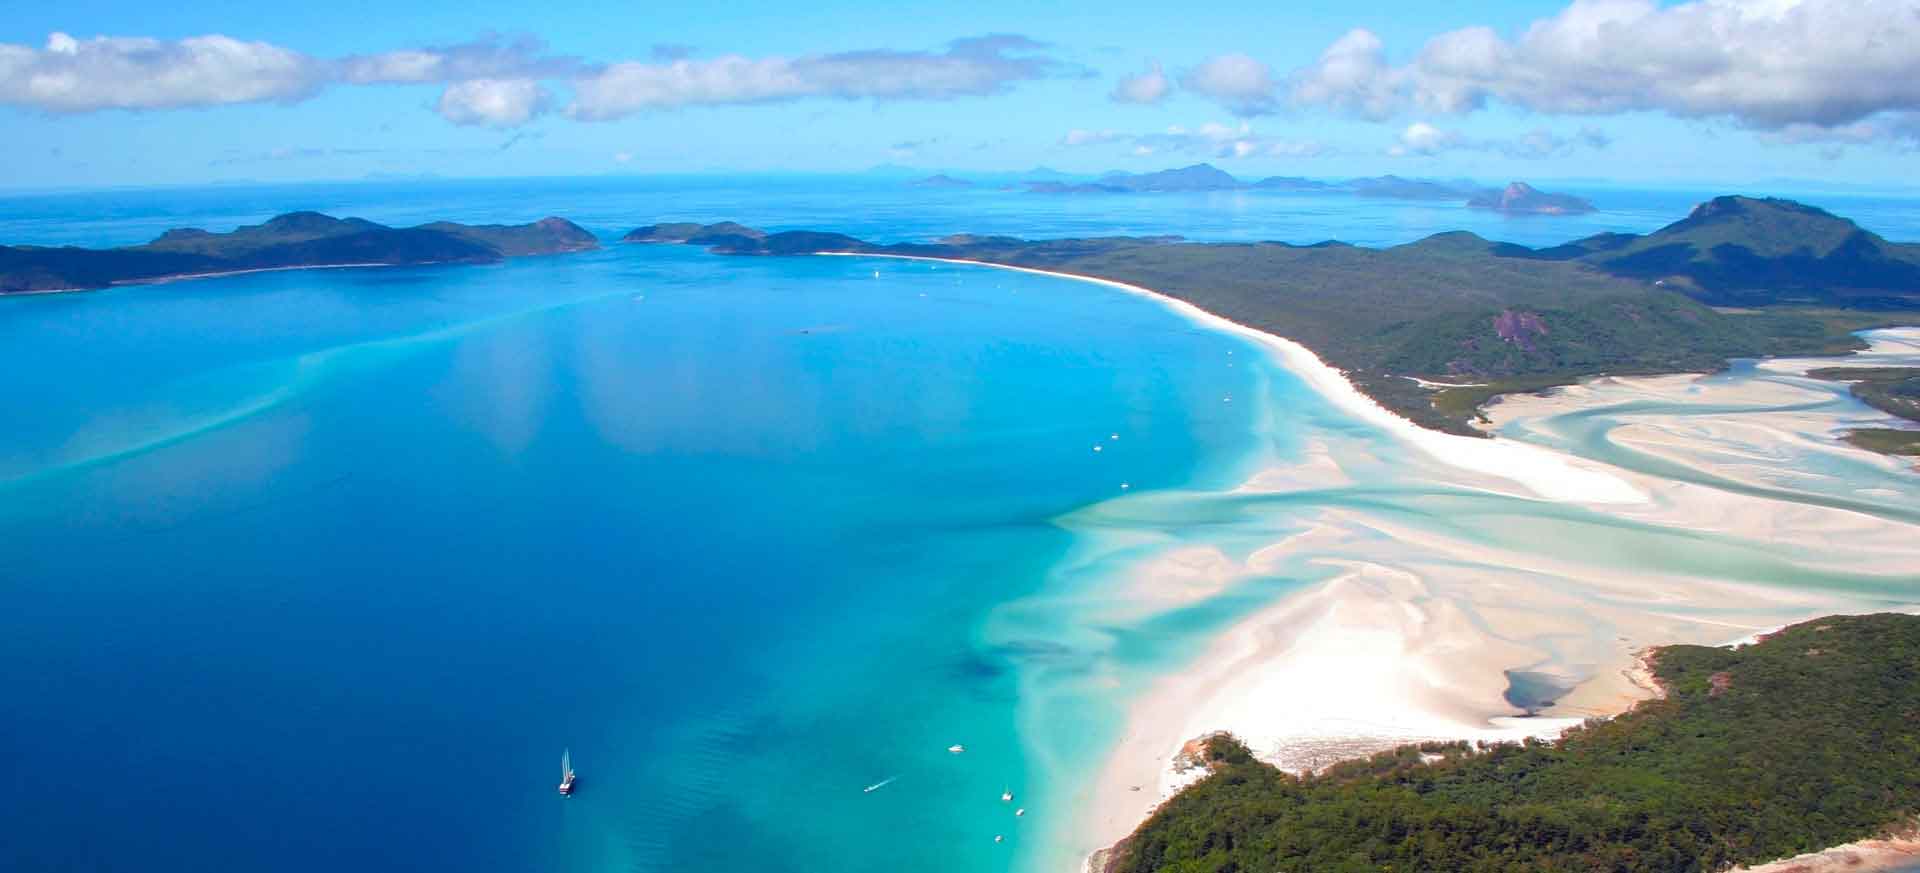 aerial view over whitsunday island